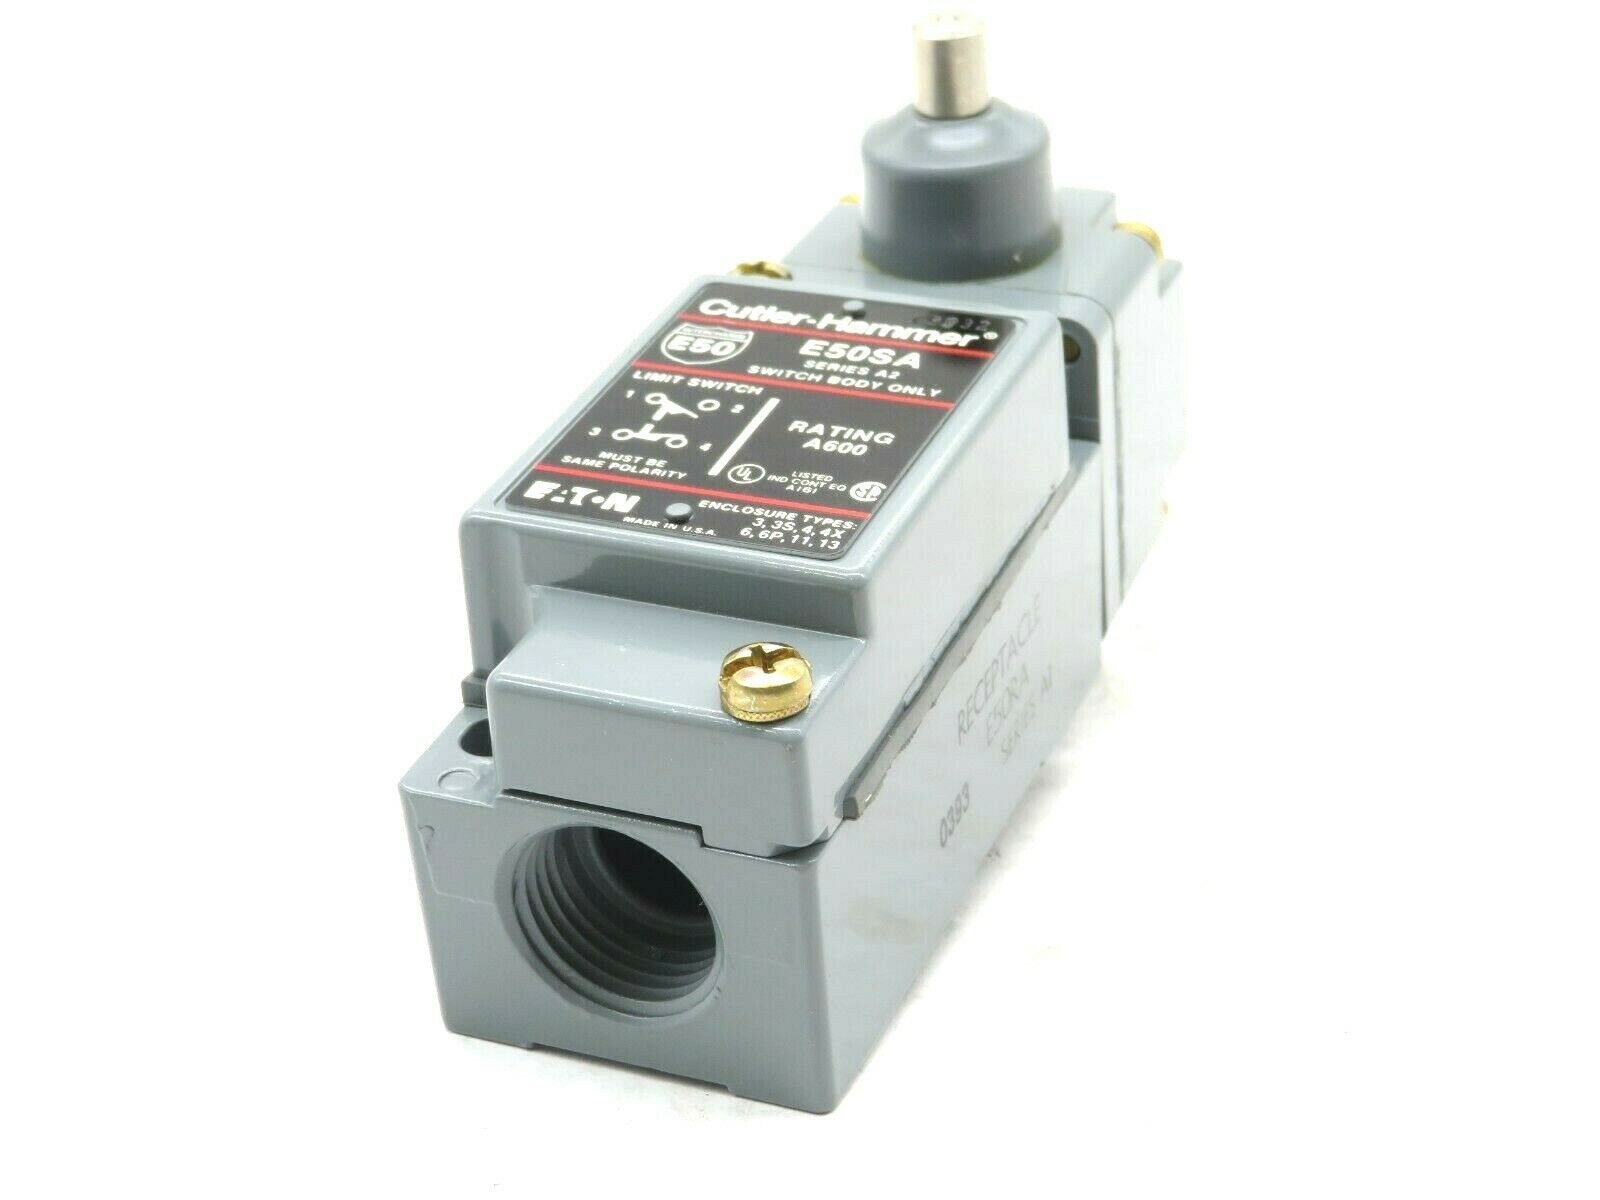 Details about   CUTLER-HAMMER E50SA SER BODY ONLY * USED * A2 LIMIT SWITCH